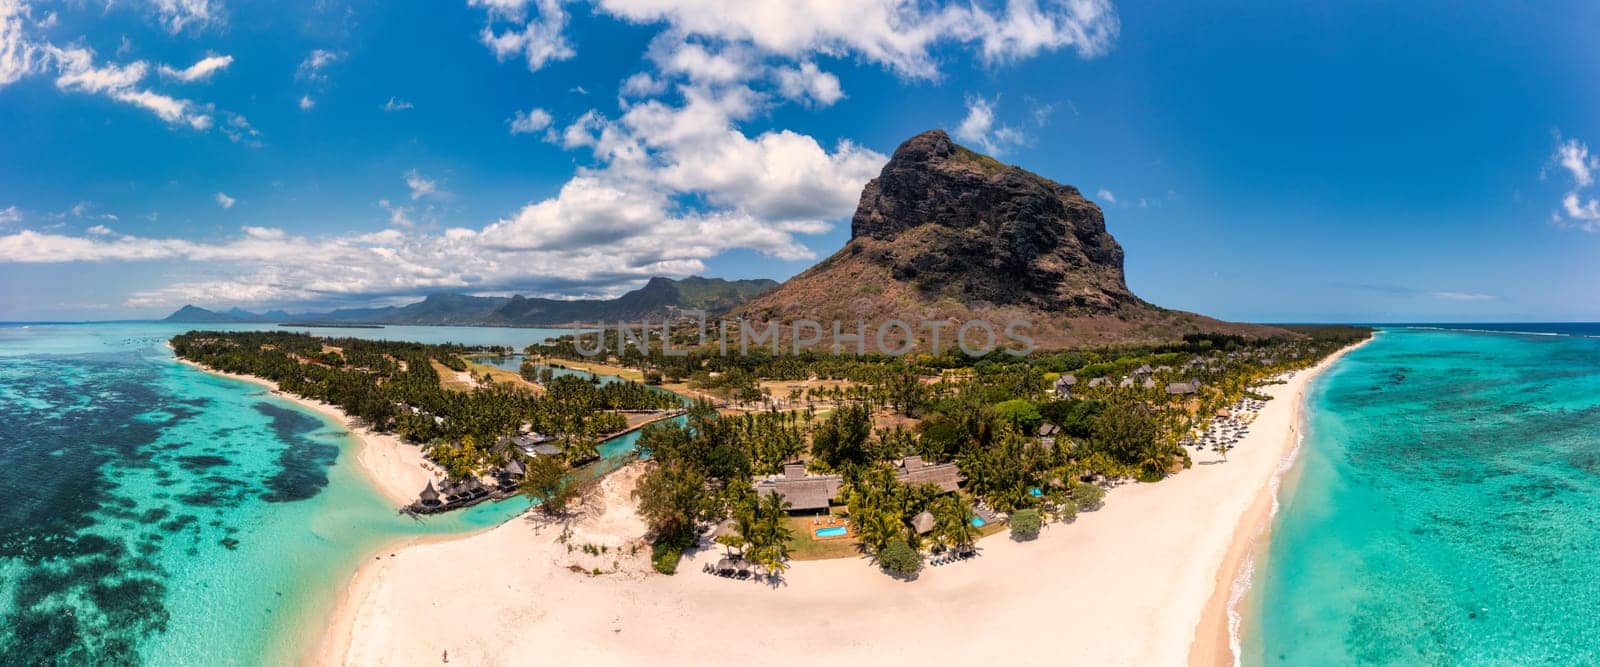 Beach with palm trees and umbrellas on Le morne beach in Mauriutius. Luxury tropical beach and Le Morne mountain in Mauritius. Le Morne beach with palm trees, white sand and luxury resorts, Mauritius by DaLiu